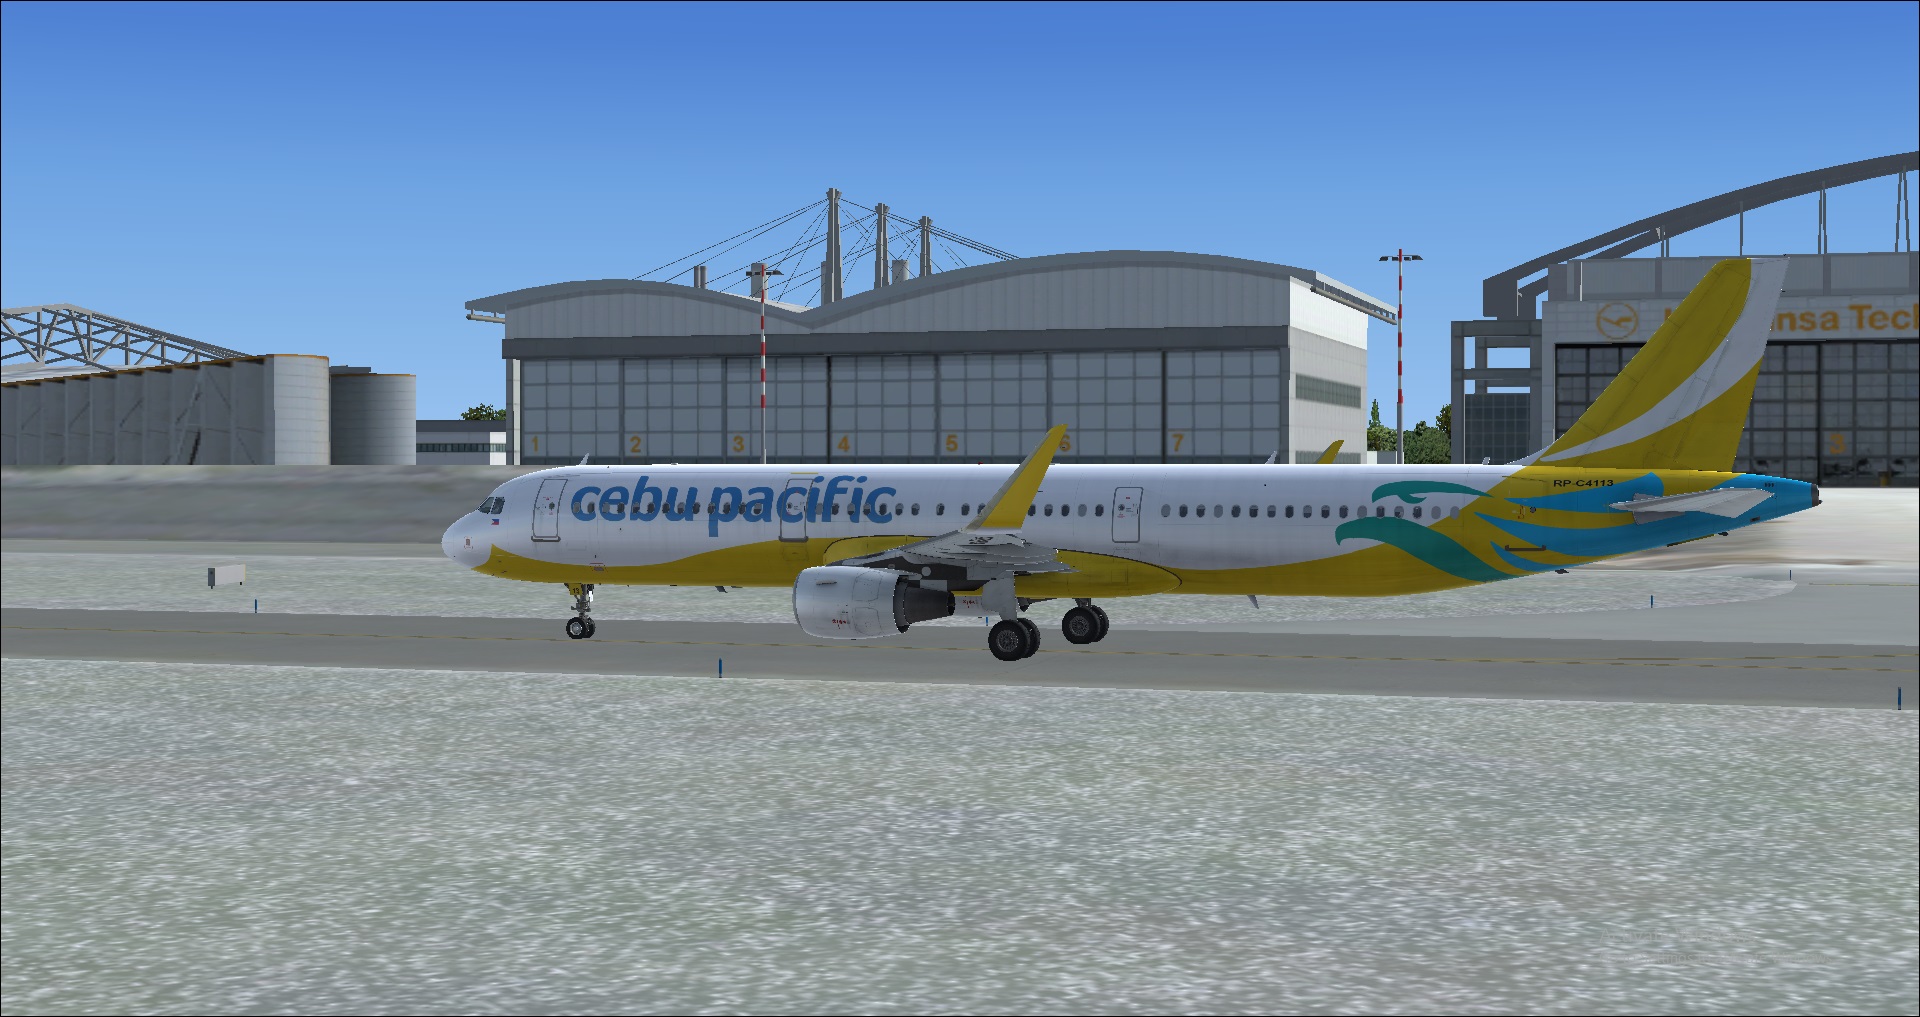 More information about "Cebu Pacific A321"